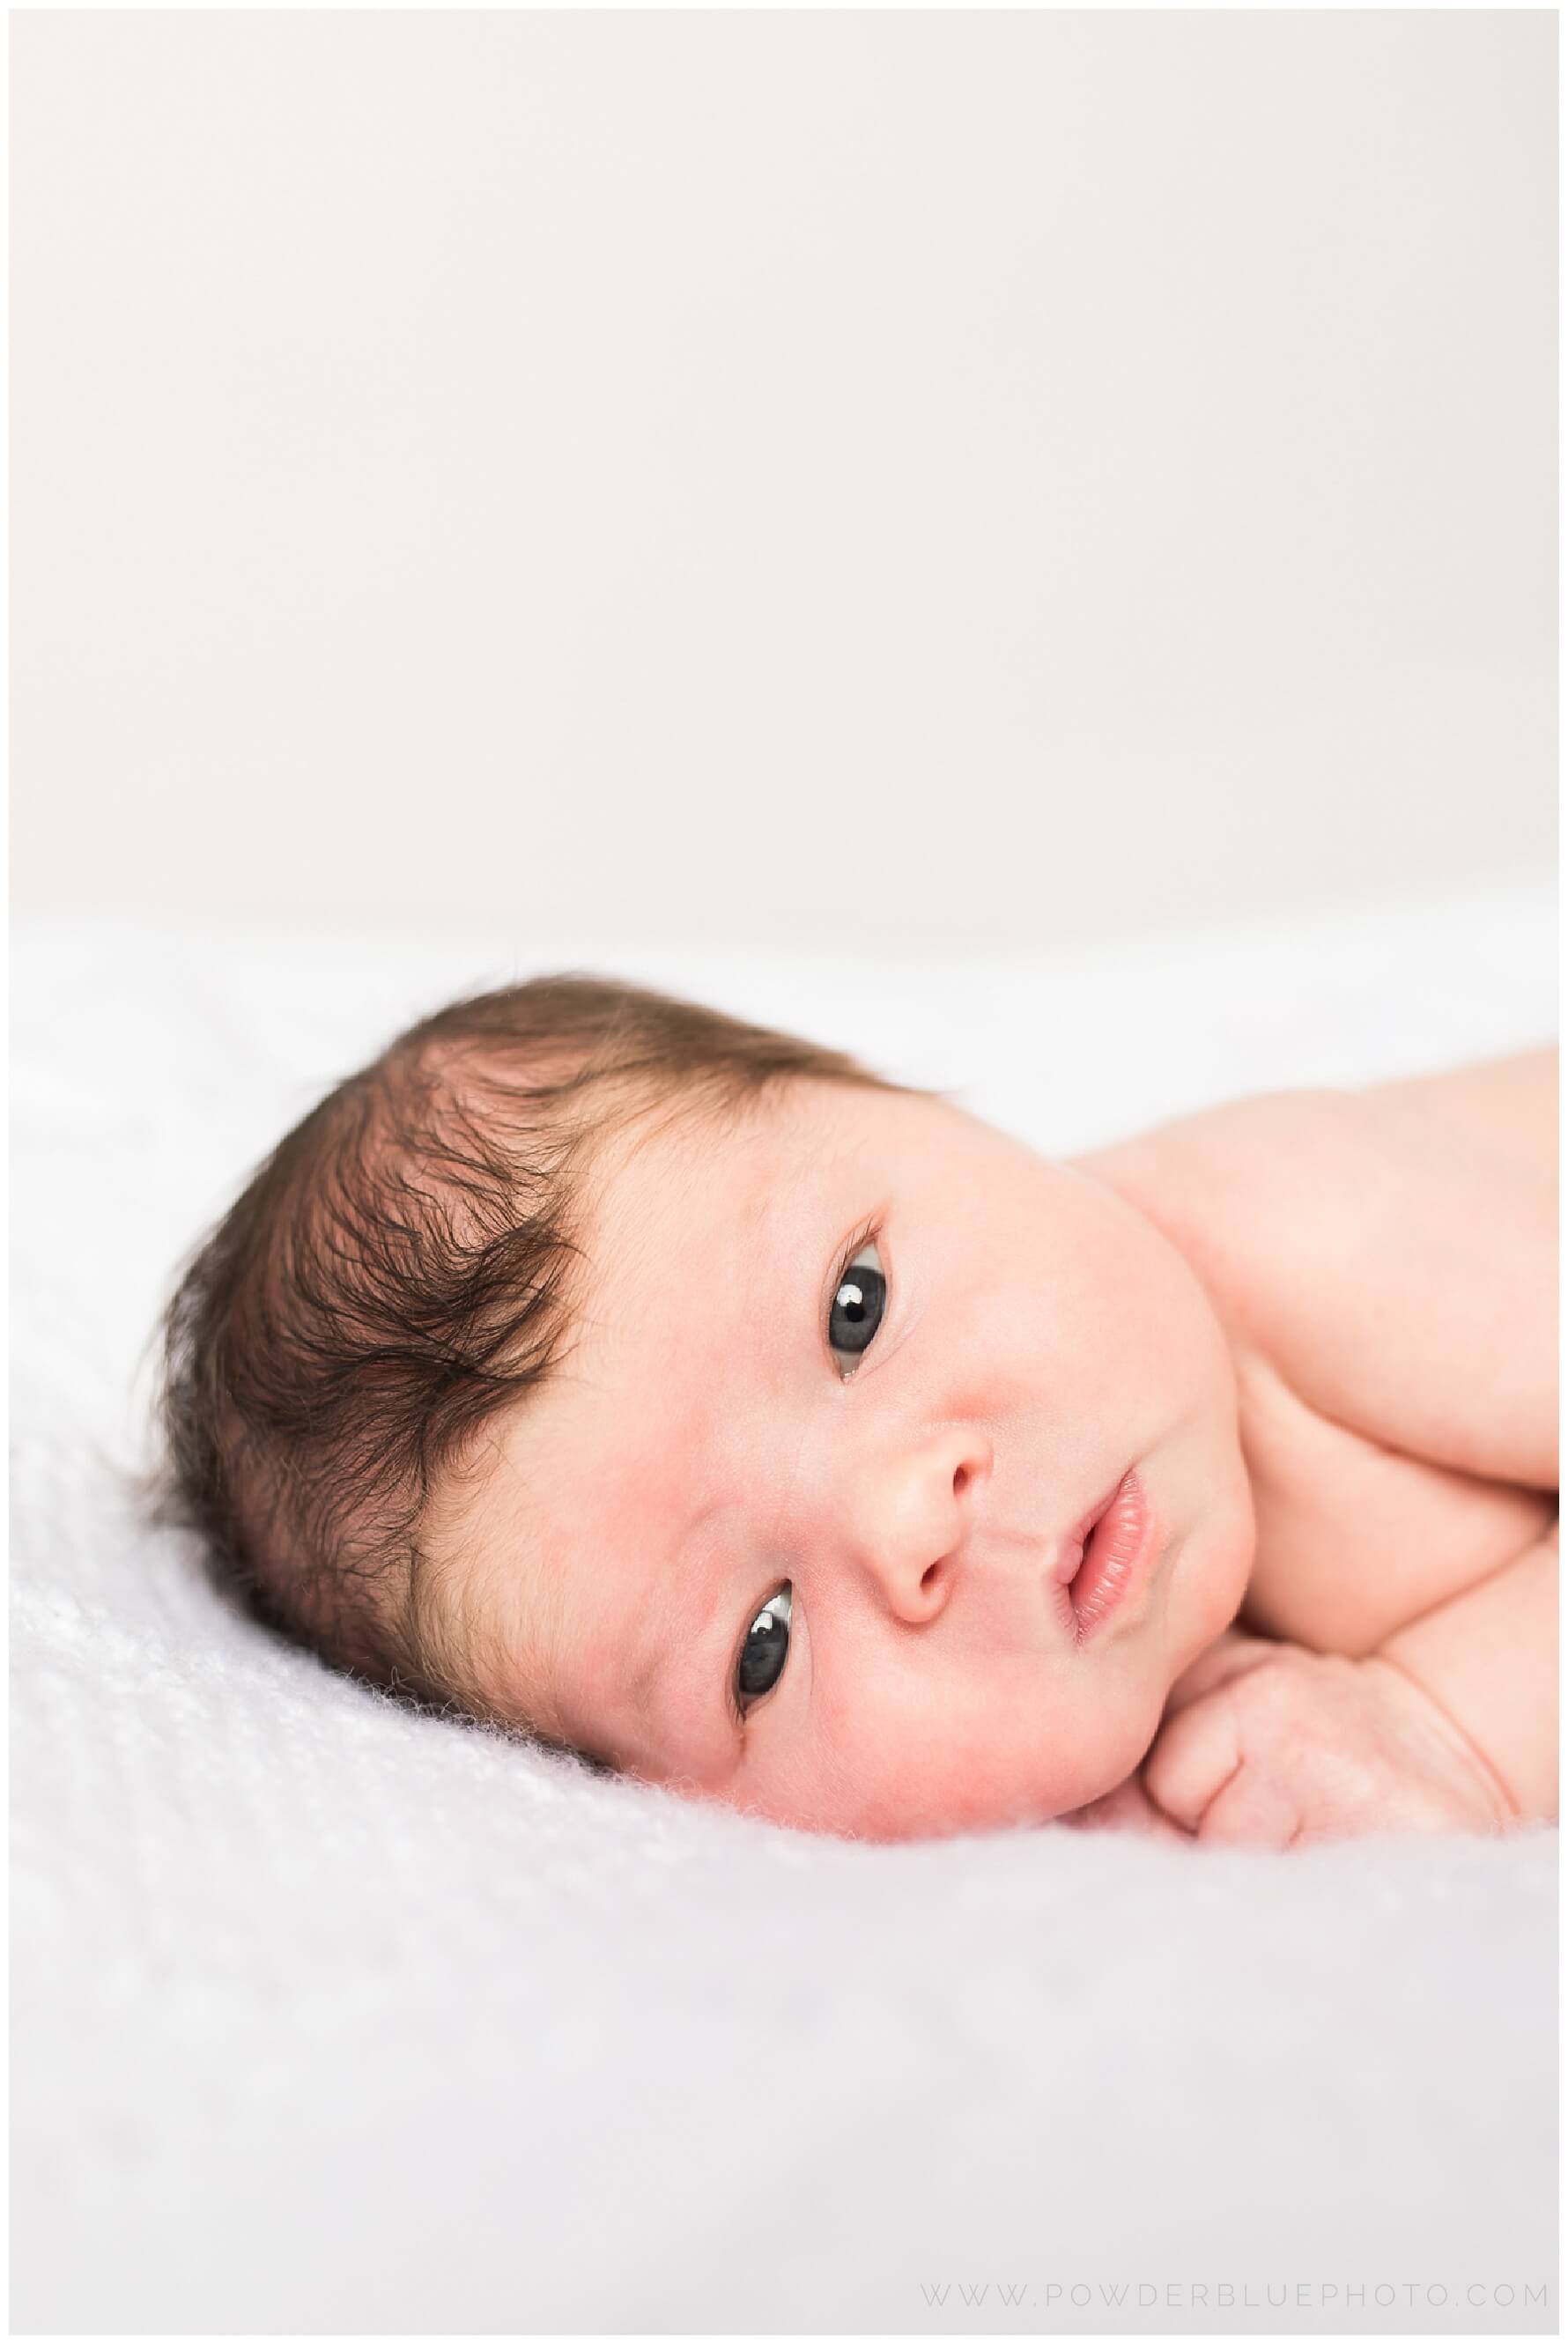 pittsburgh newborn photographer. simple, natural newborn portrait in studio on a white backdrop. baby girl. no props.